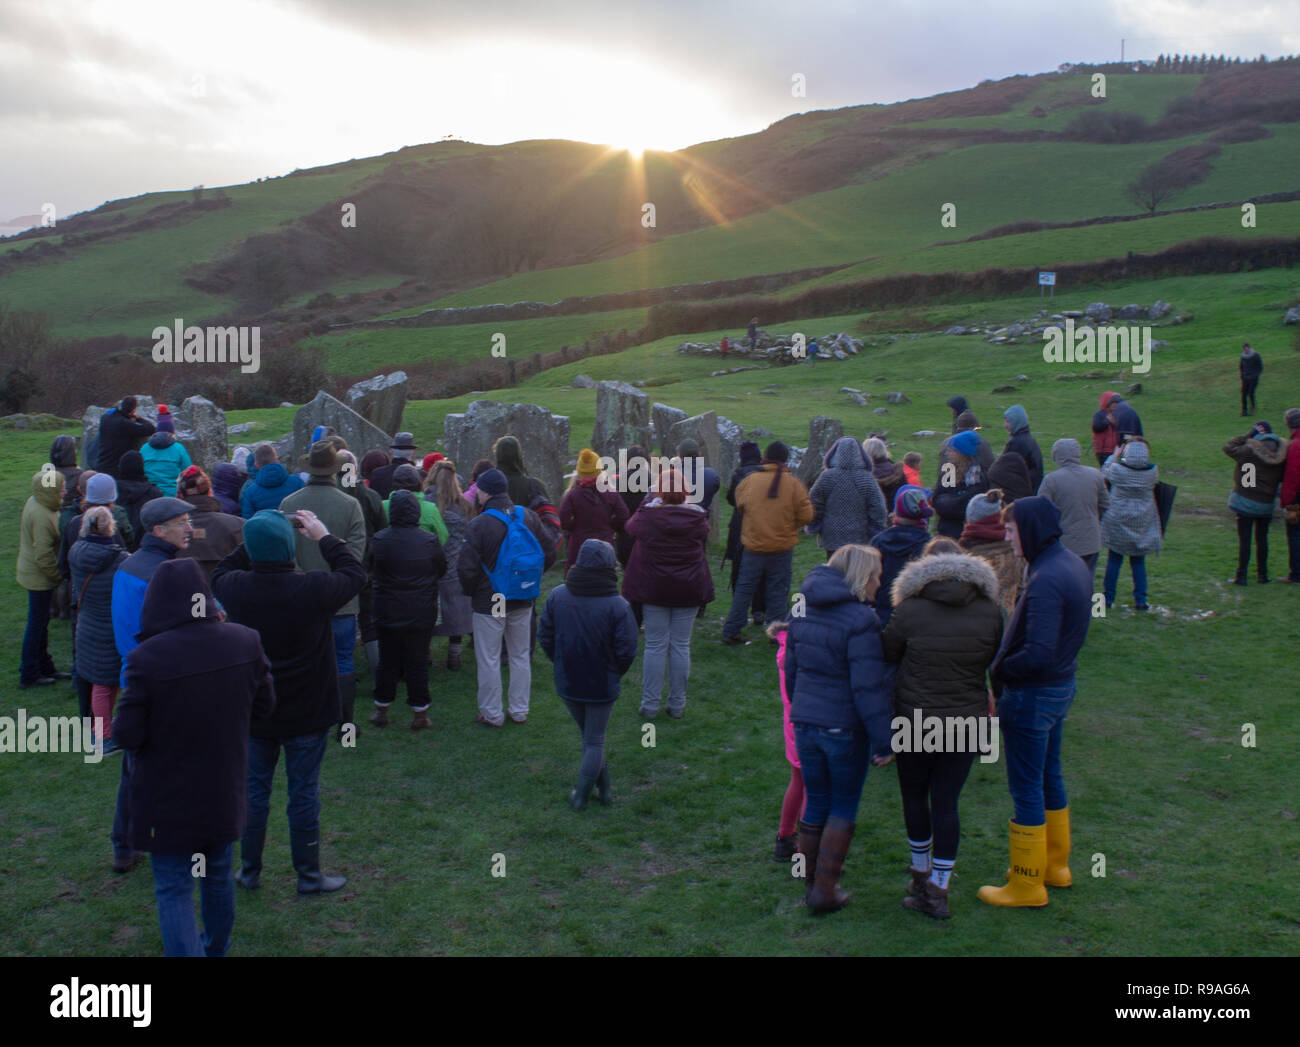 Drombeg Stone Circle, Glandore, West Cork, Ireland, December 21st 2018. Large crowds gathered at Drombeg Stone Circle this evening to celebrate the sunset on the Midwinter Solstice. Most experts believe this ancient stone circle was built to celebrate this shortest day of the year. Credit: aphperspective/Alamy Live News Stock Photo